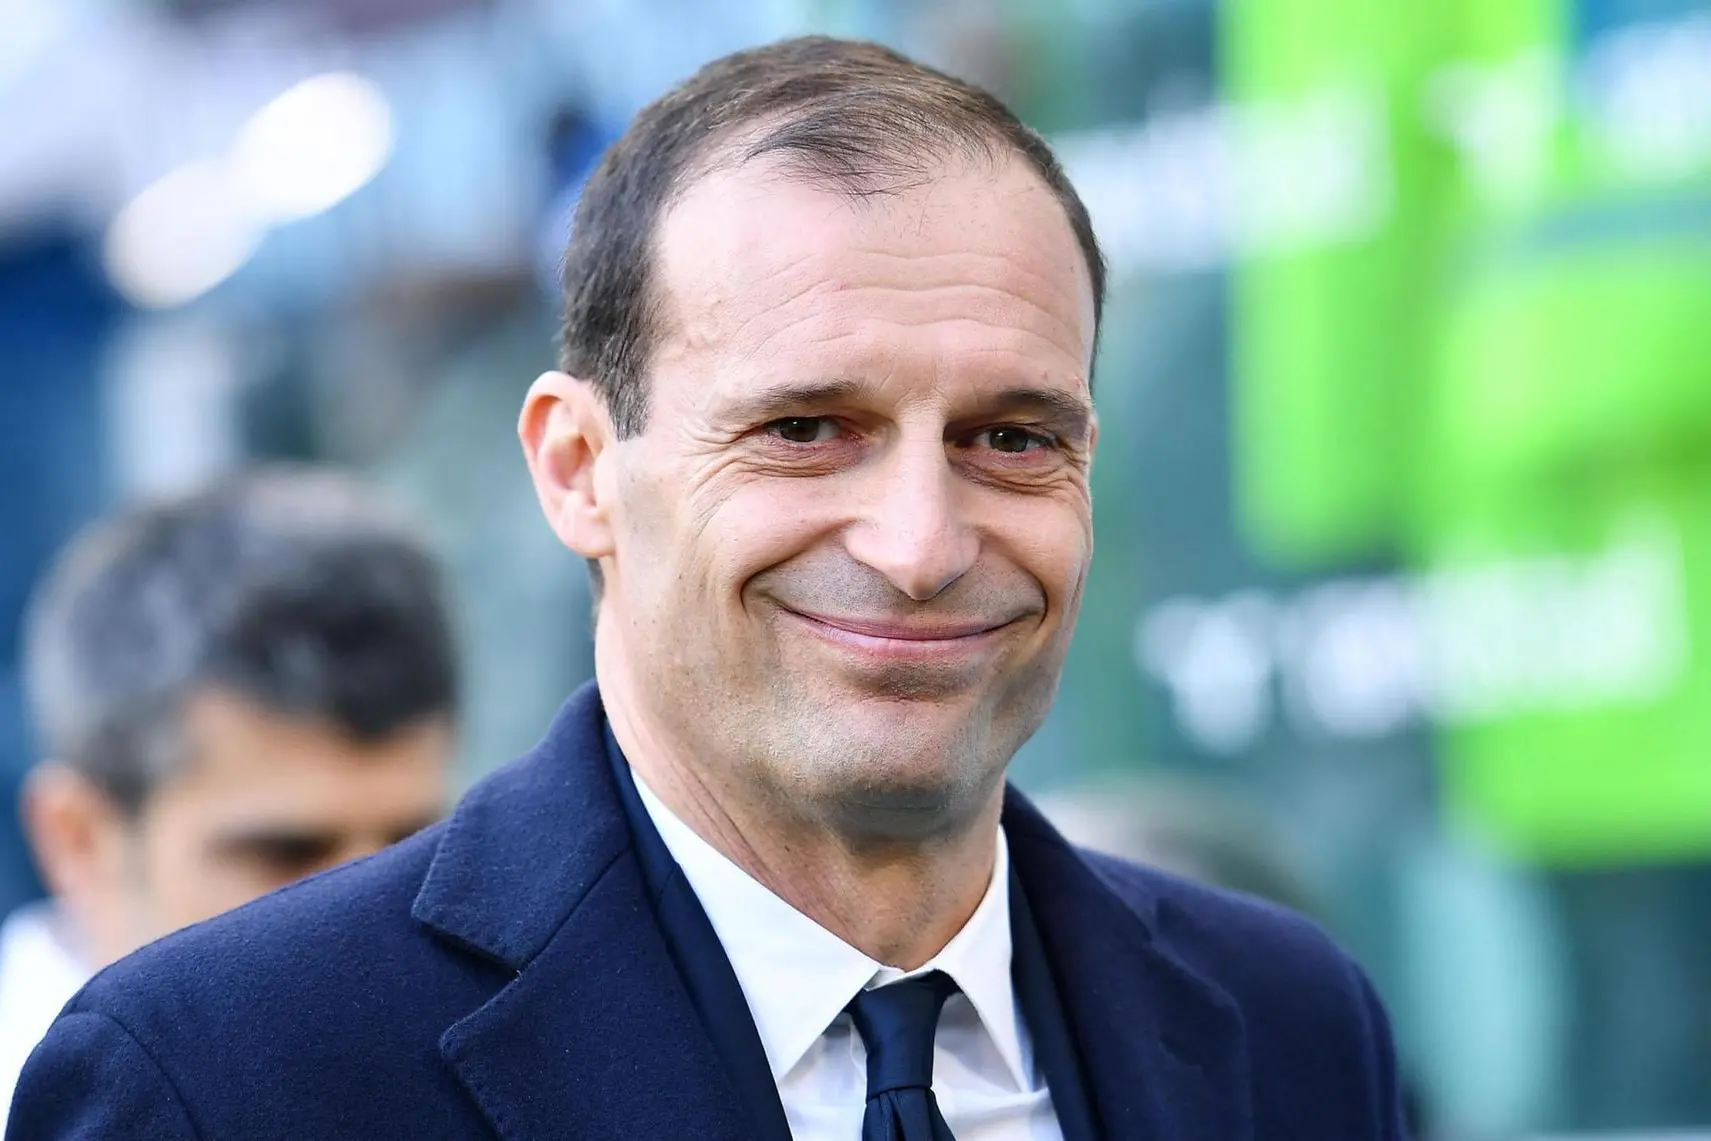 Head coach of Juventus FC Massimilano Allegri reacts during the Italian Serie A soccer match Juventus FC vs US Sassuolo at Allianz Stadium in Turin, Italy, 4 February 2018. ANSA/ALESSANDRO DI MARCO